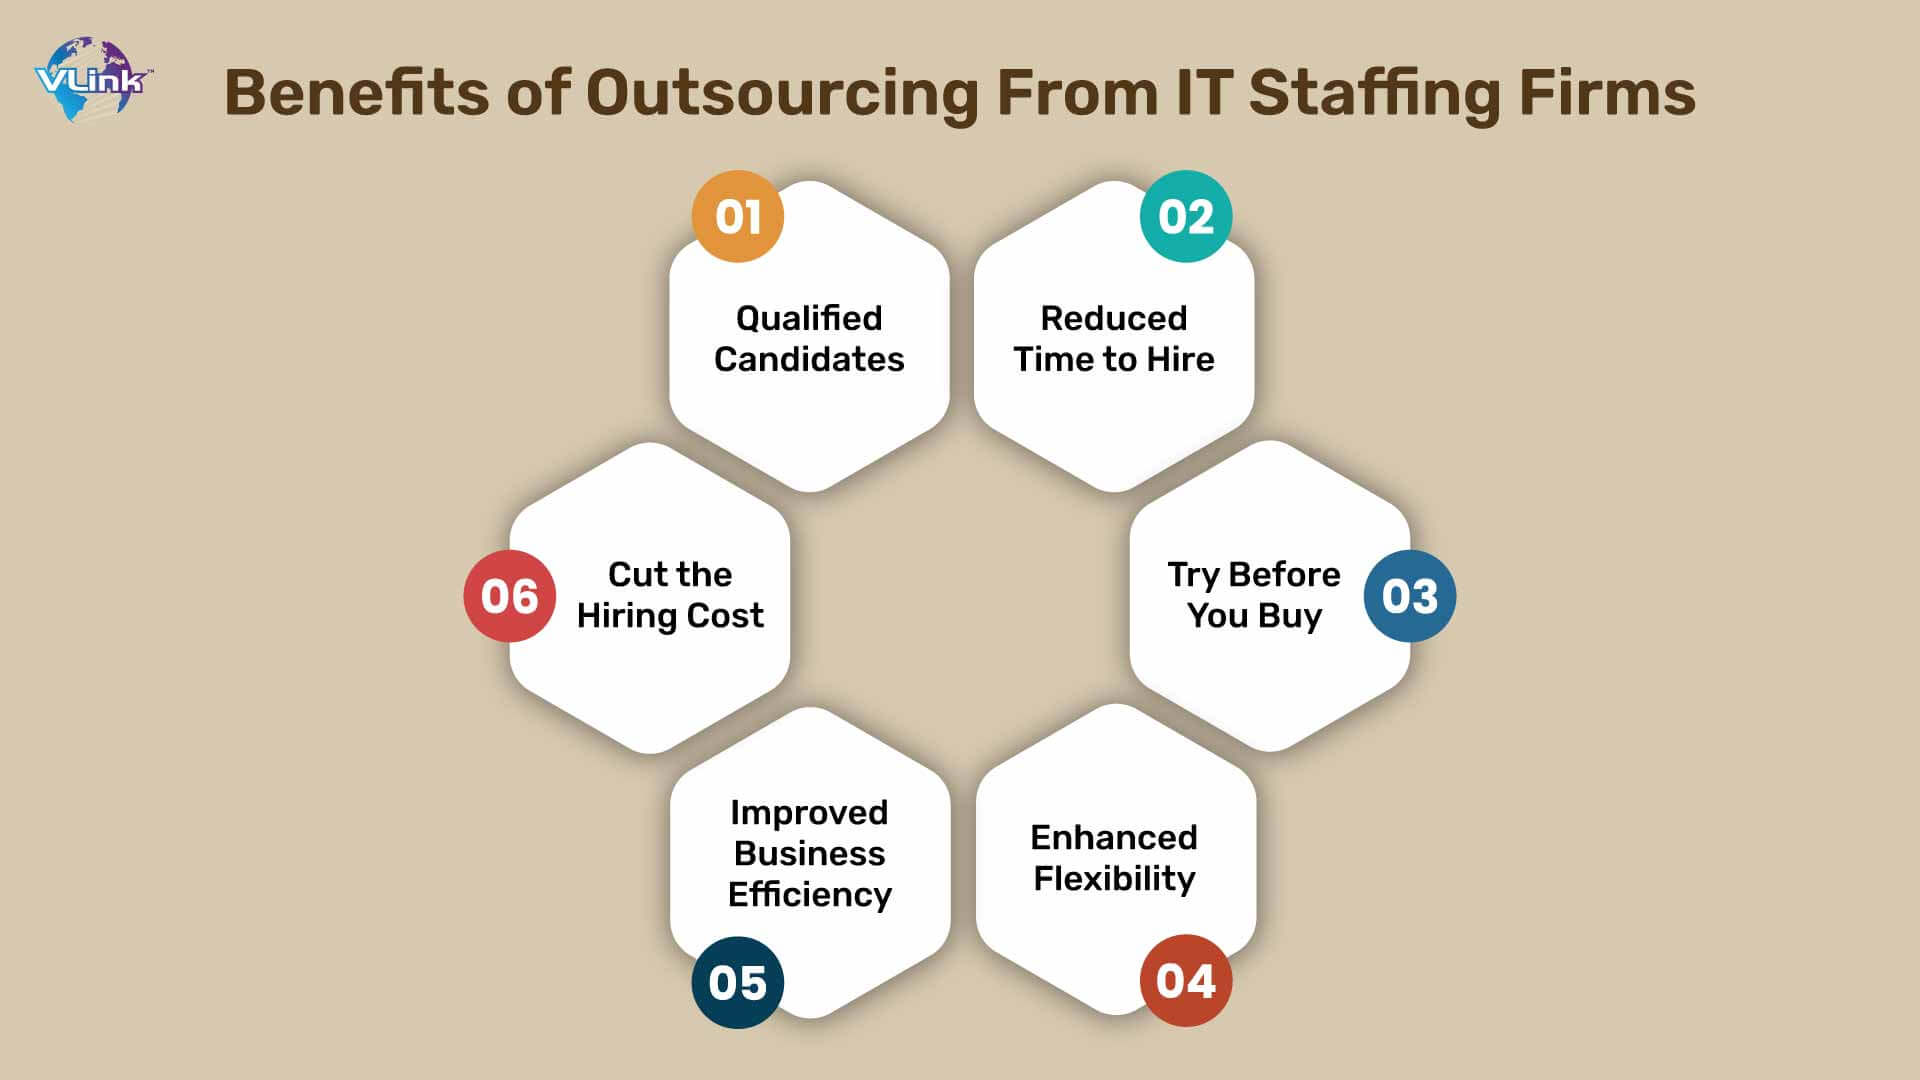 Benefits of Outsourcing From IT Staffing Firms